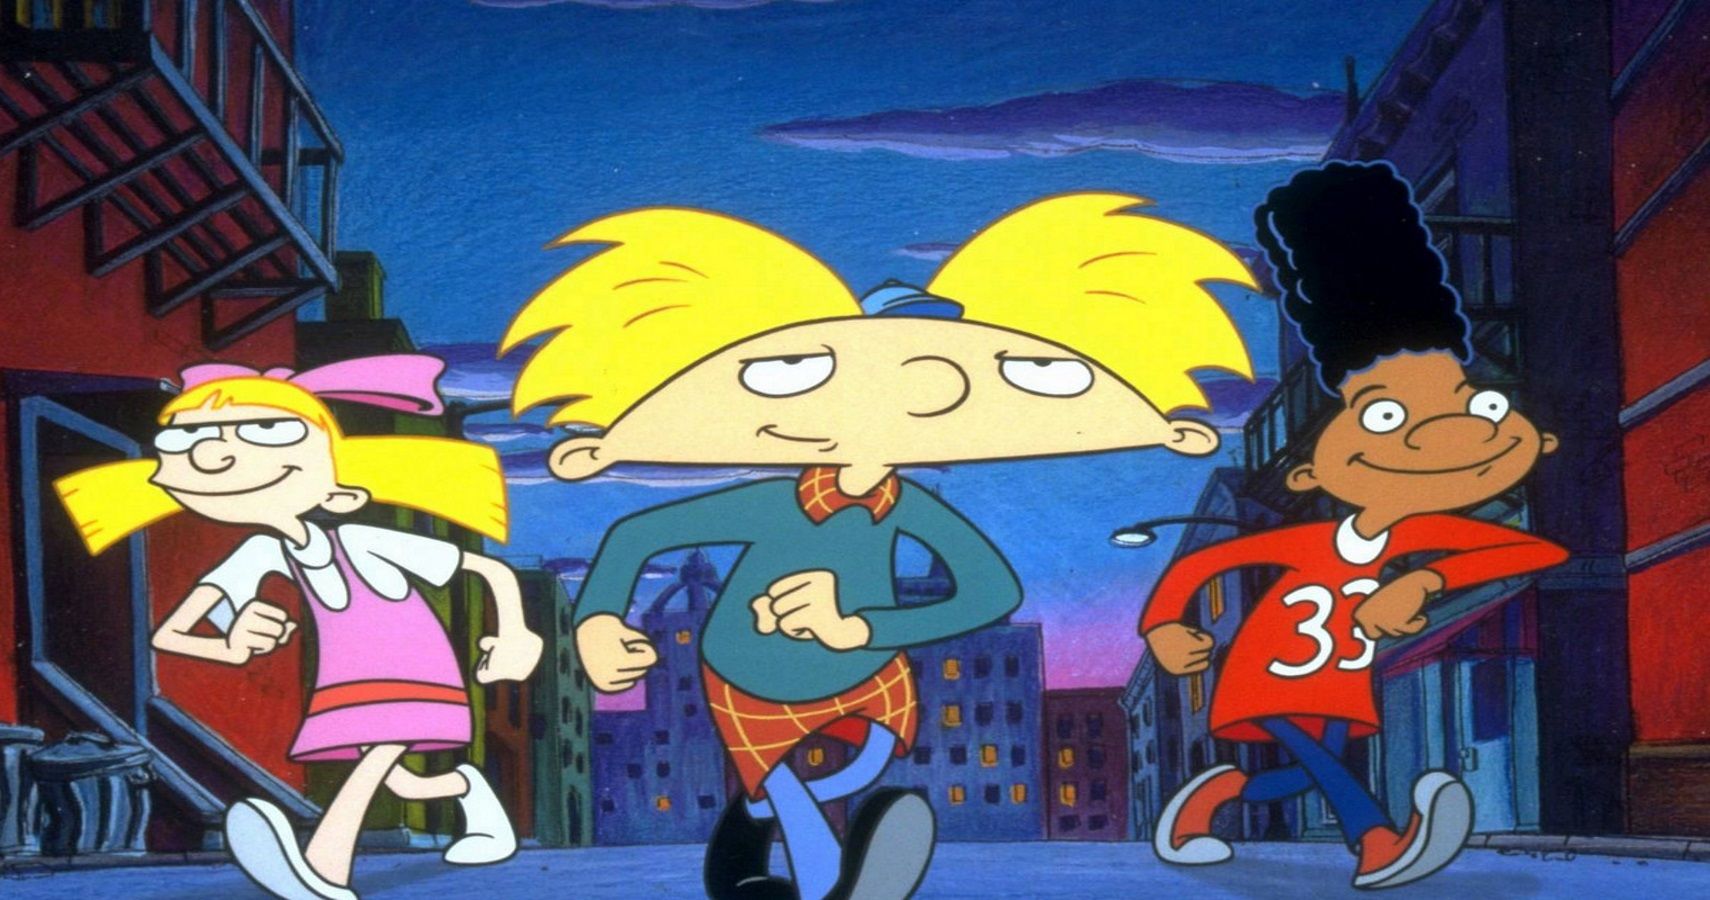 Trending Global Media 😬🤐😚 5 Best Episodes Of Hey Arnold According To Imdb And The 5 Worst 